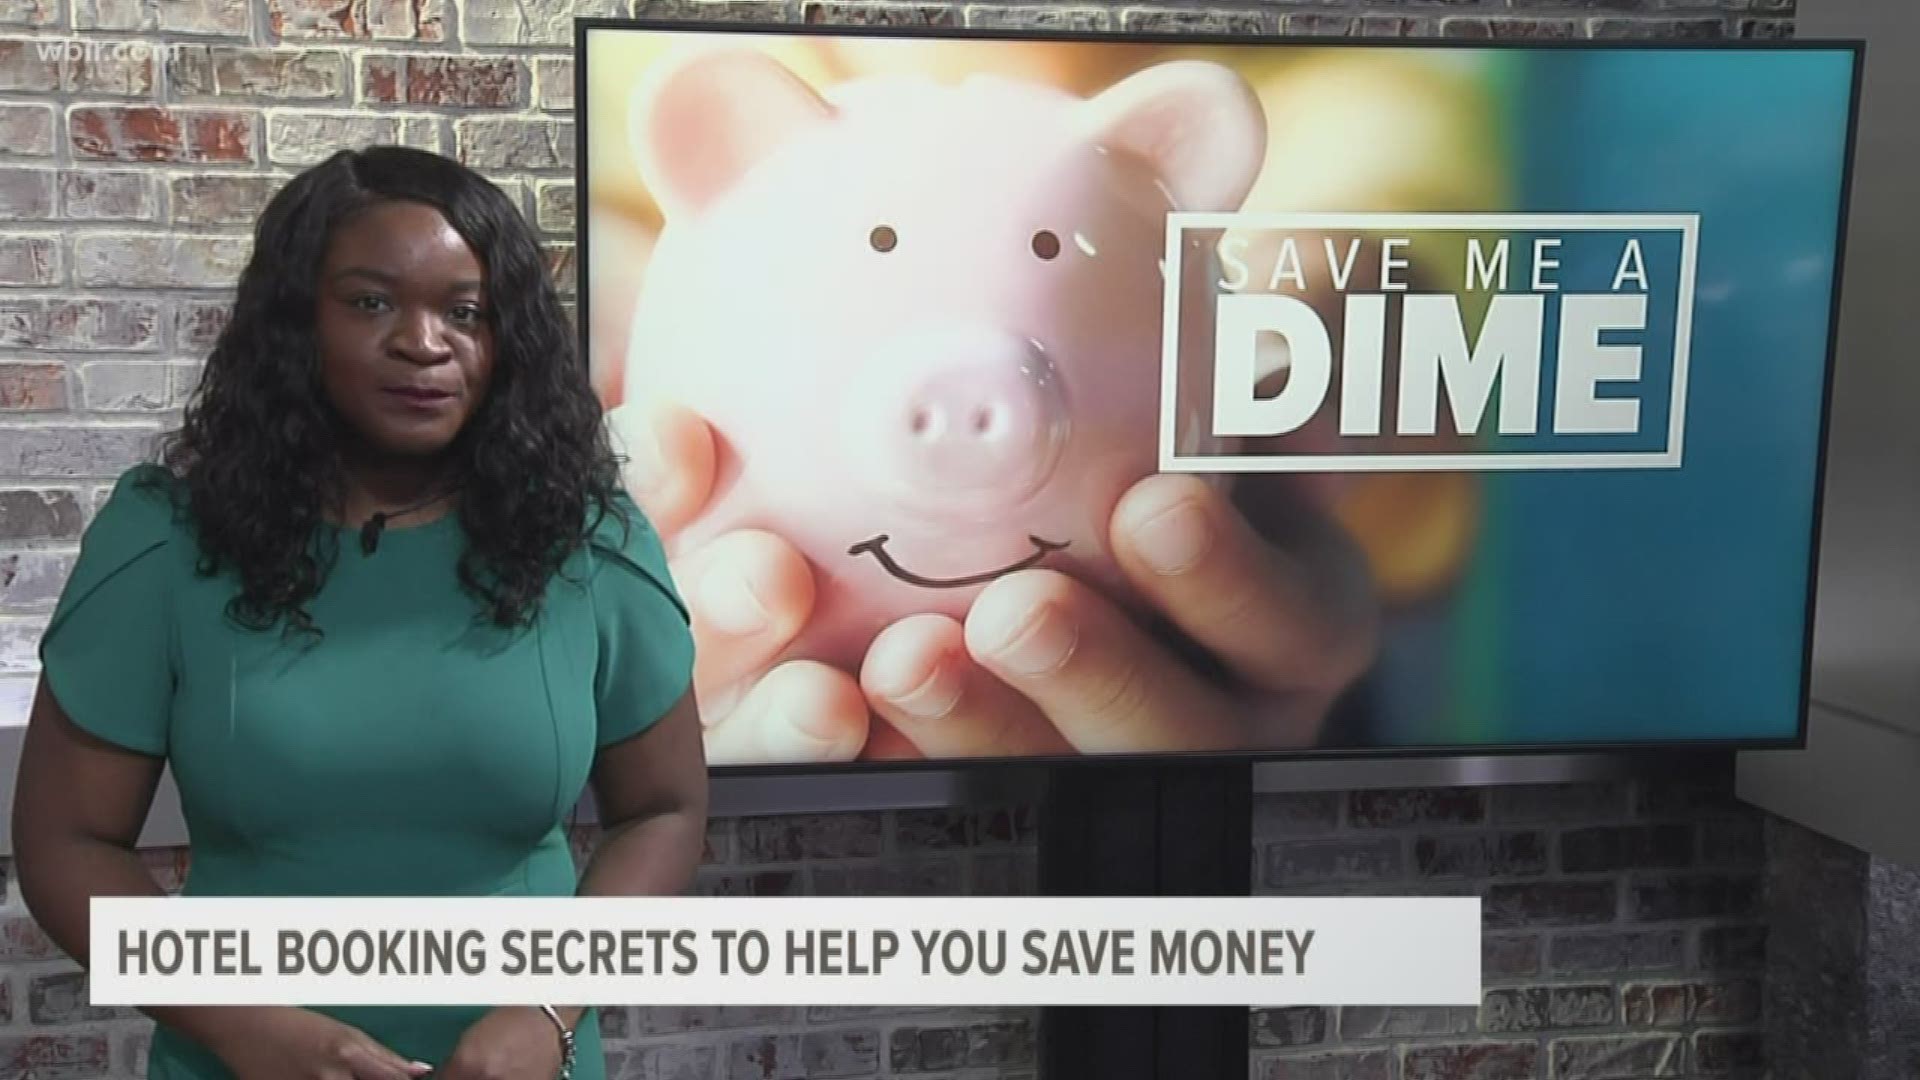 10News reporter Yvonne Thomas tracked down all the secret tricks that help you save money on your hotel stay.